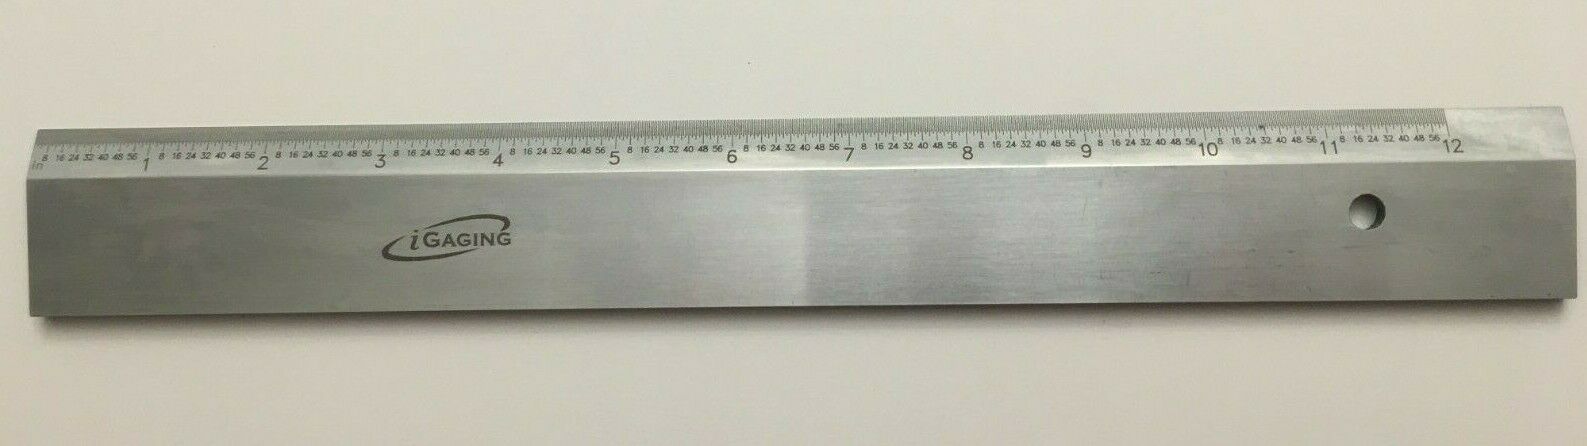 iGaging T21578 - 12 Bevel Edge Straight Edges with Scale